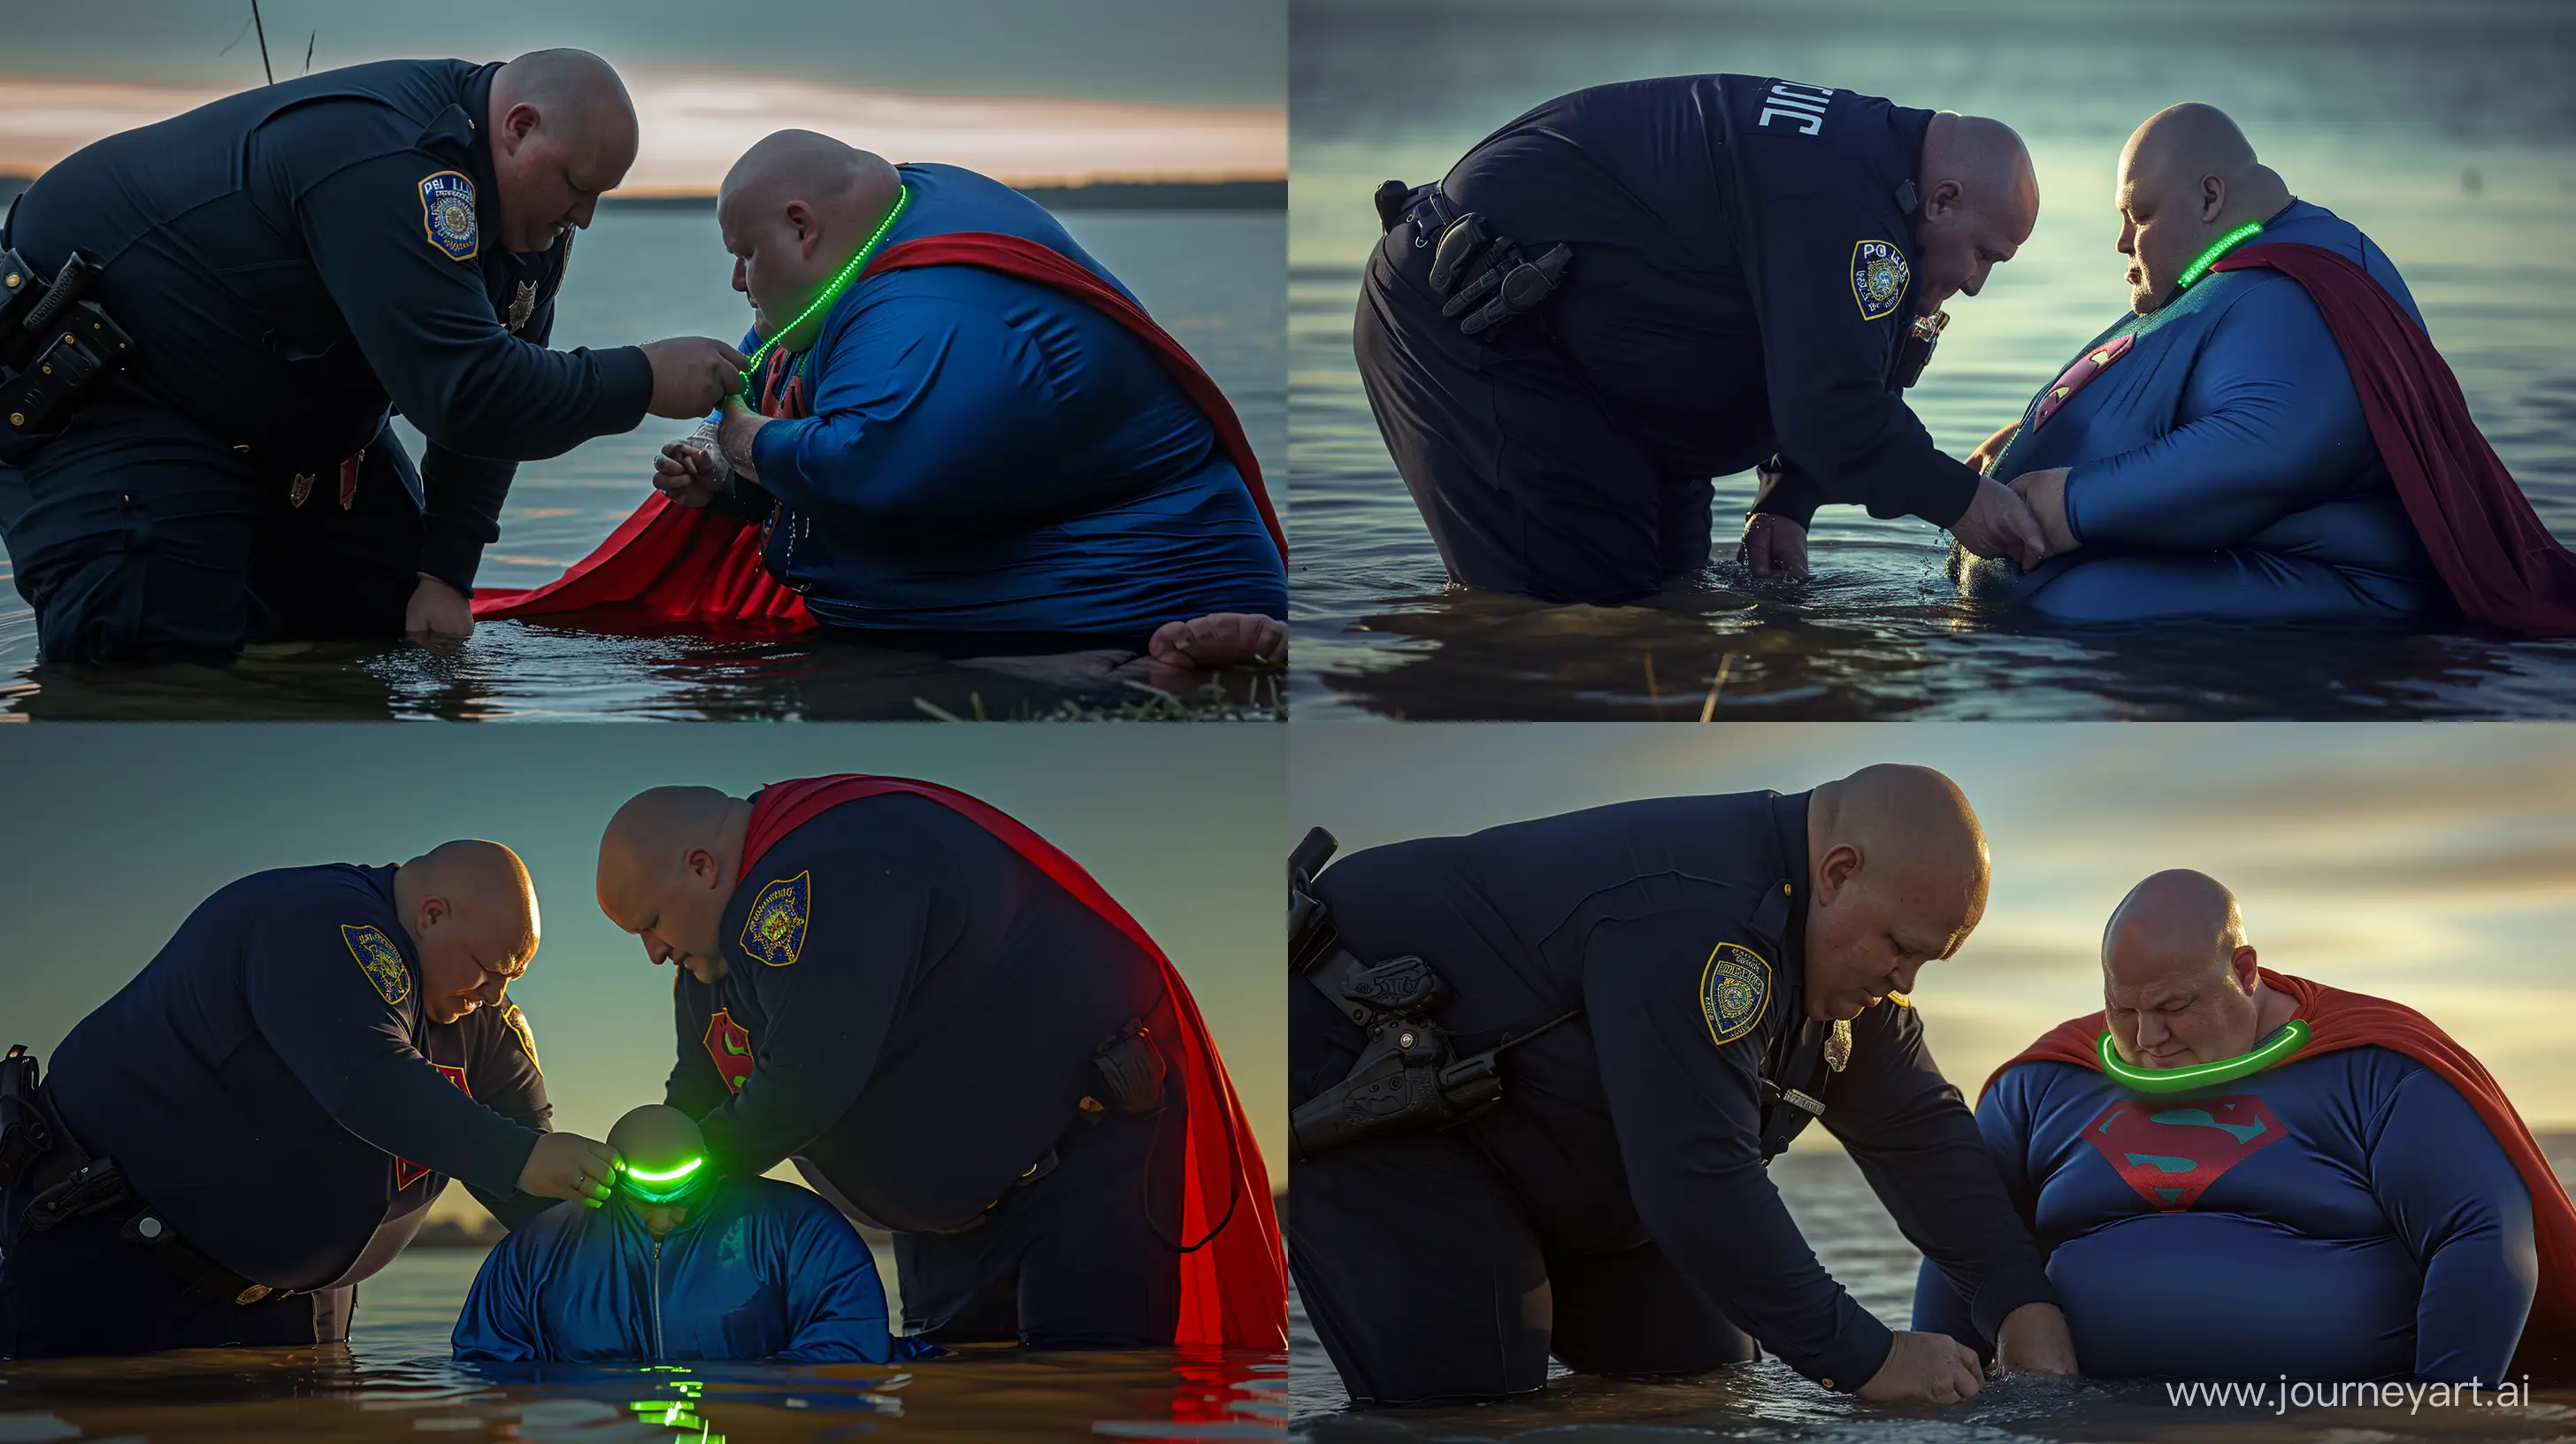 Elderly-Policemen-Dressing-up-a-Superhero-in-Water-Unique-Costume-Moment